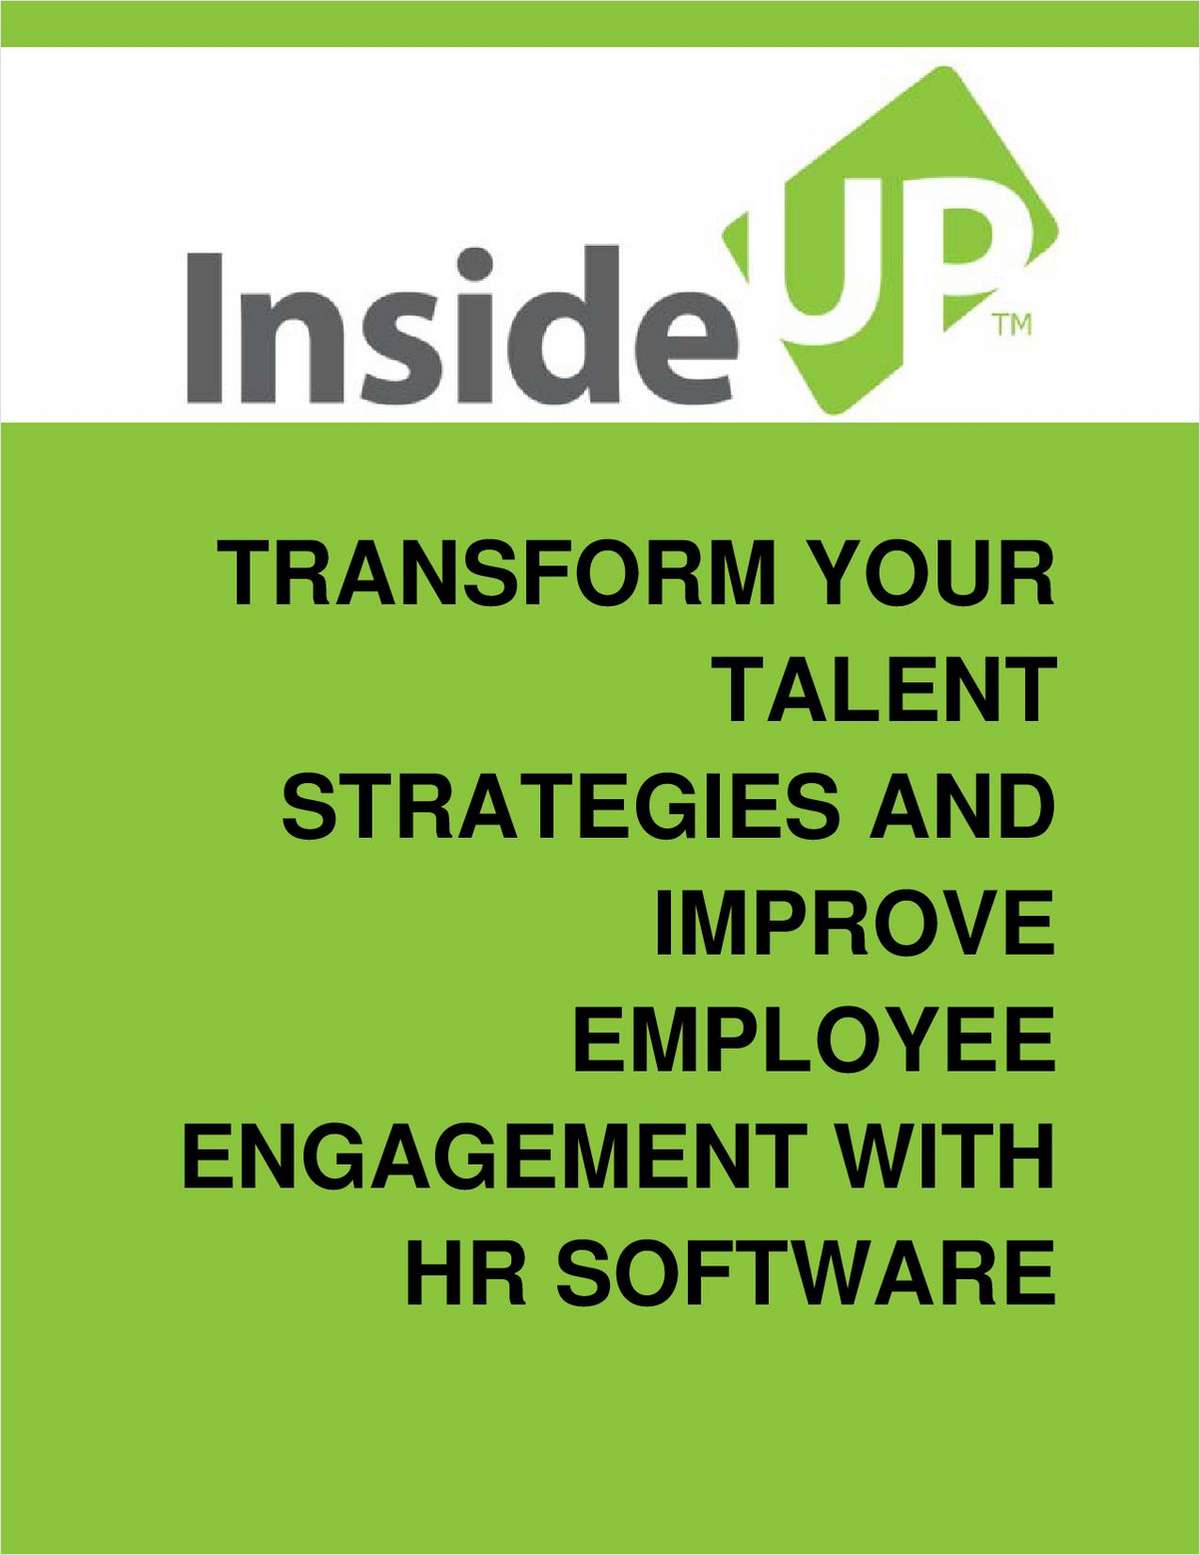 How HR Software Can Transform Your Talent Strategies and Improve Employee Engagement